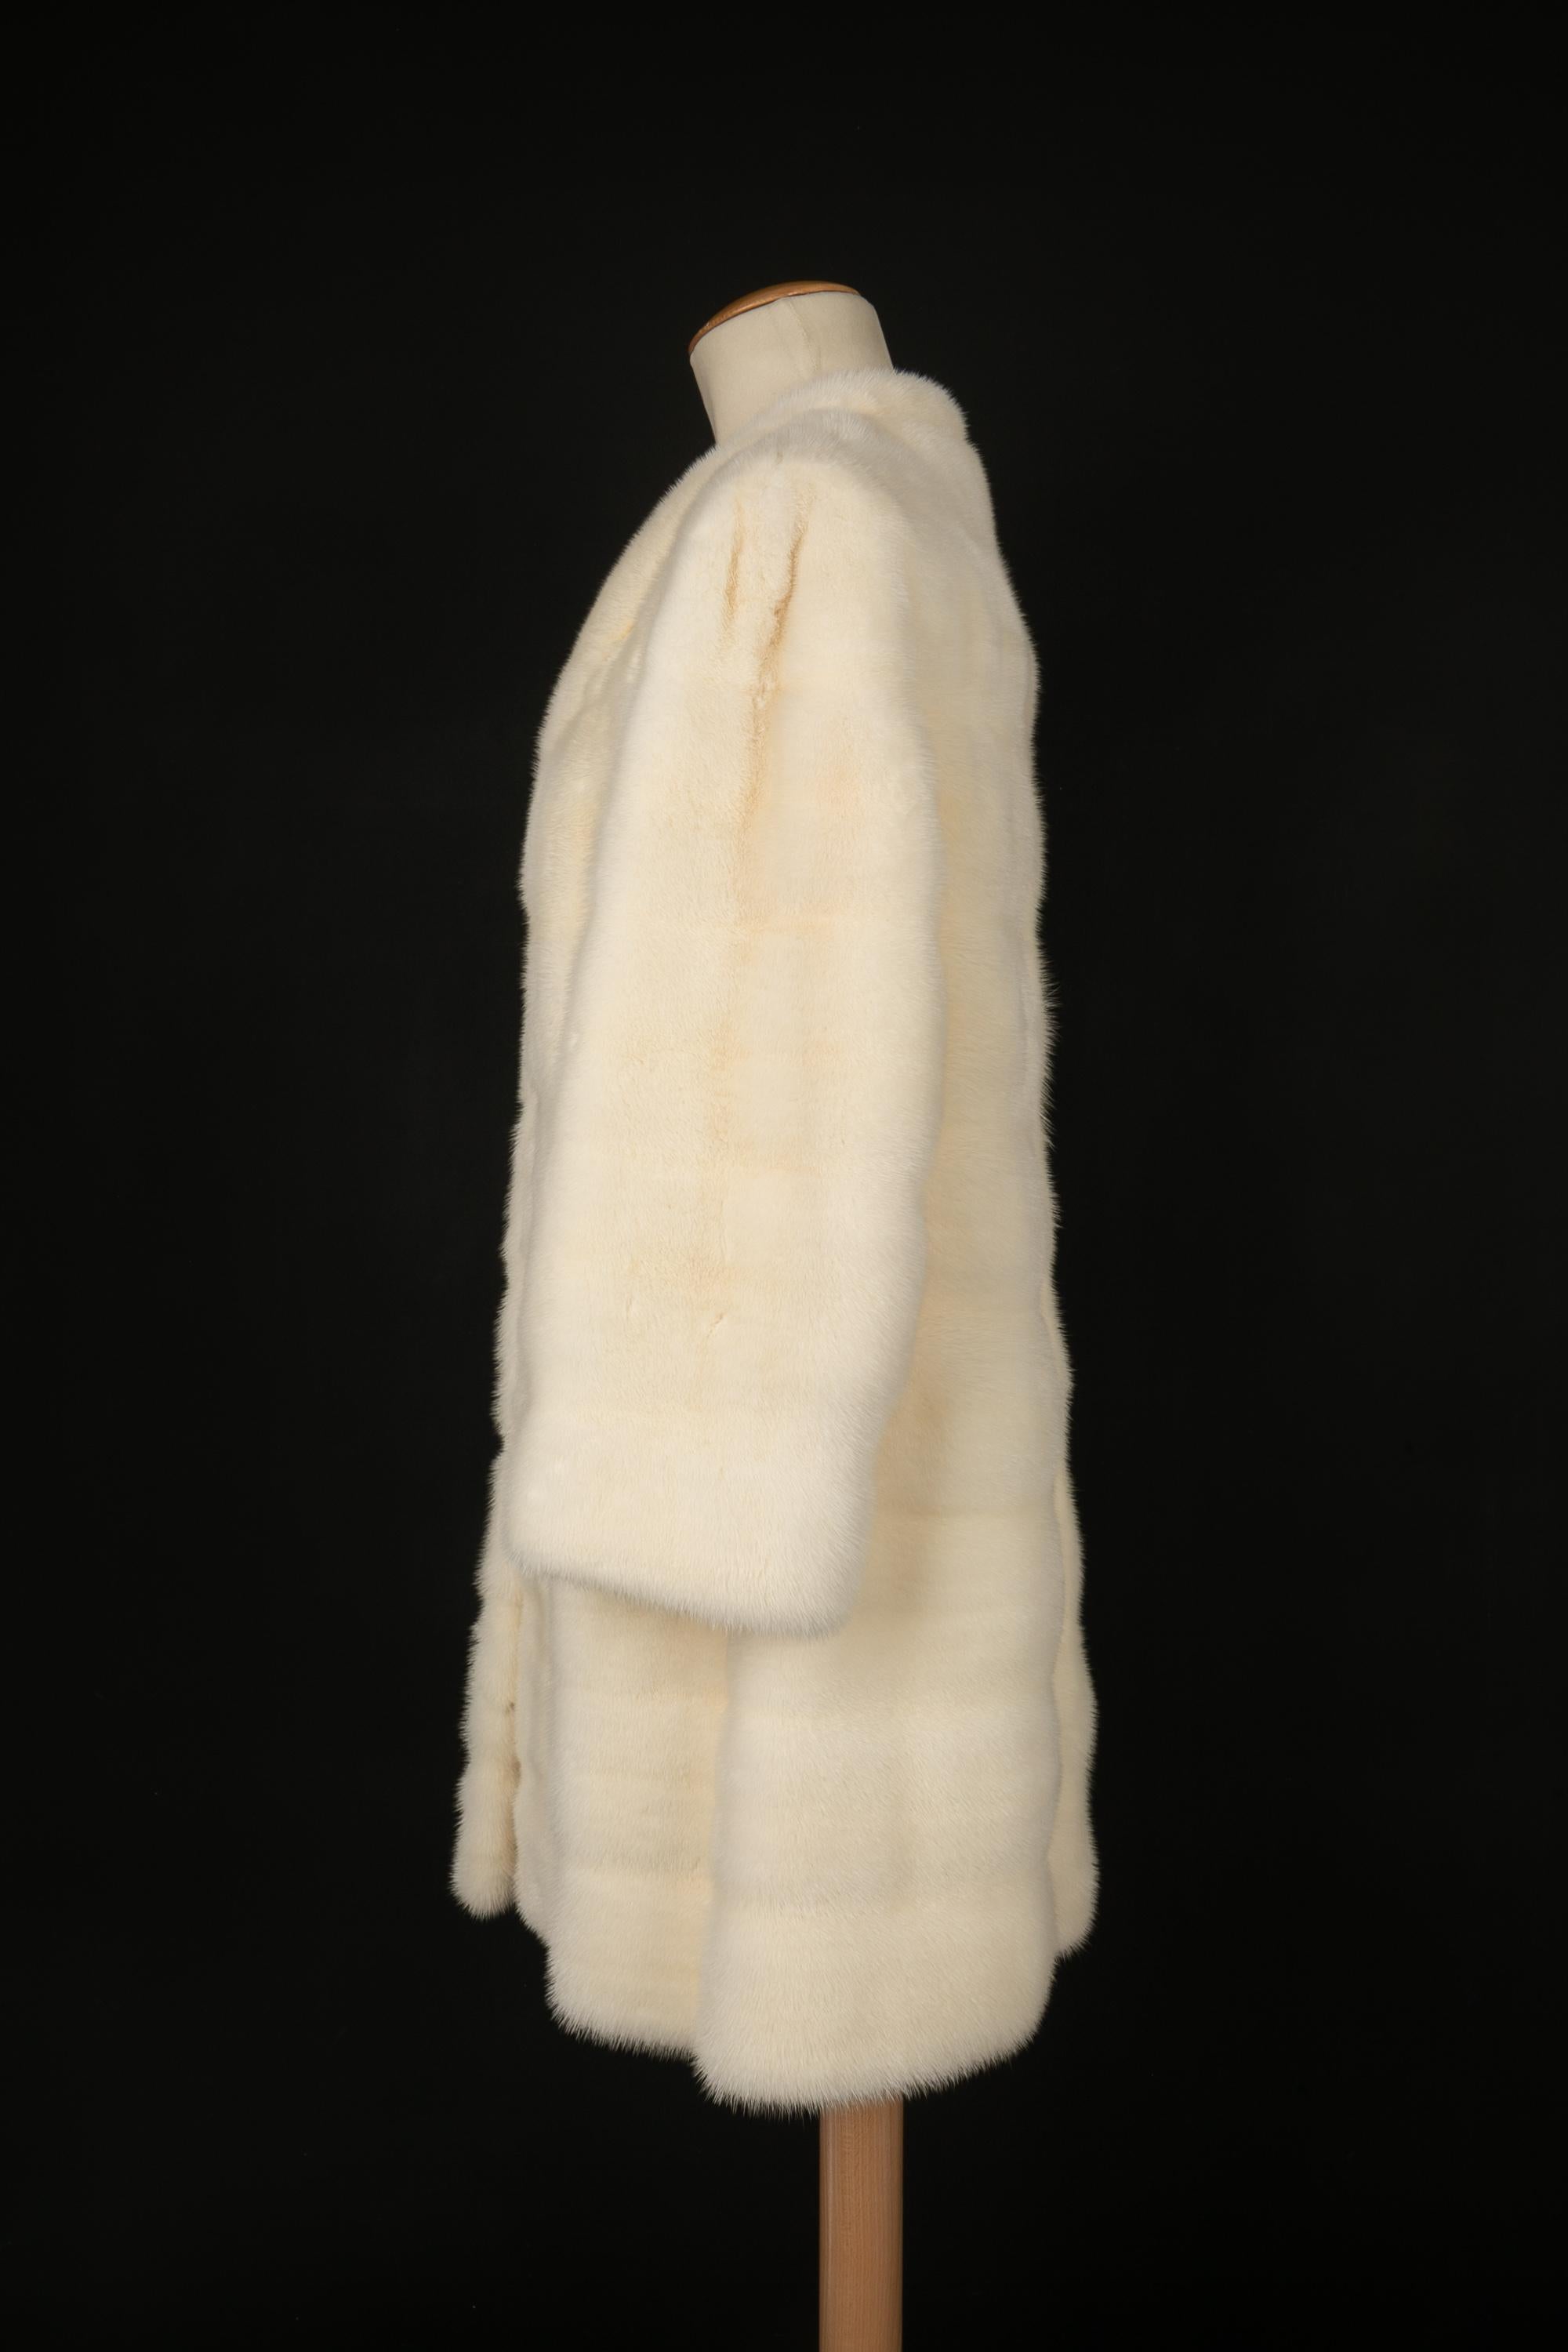 DIOR - (Made in France) Off-white mink coat with a silk lining. Size 40FR

Condition:
Very good condition

Dimensions:
Shoulder width: 45 cm - Sleeve length: 52 cm - Length: 85 cm

M46